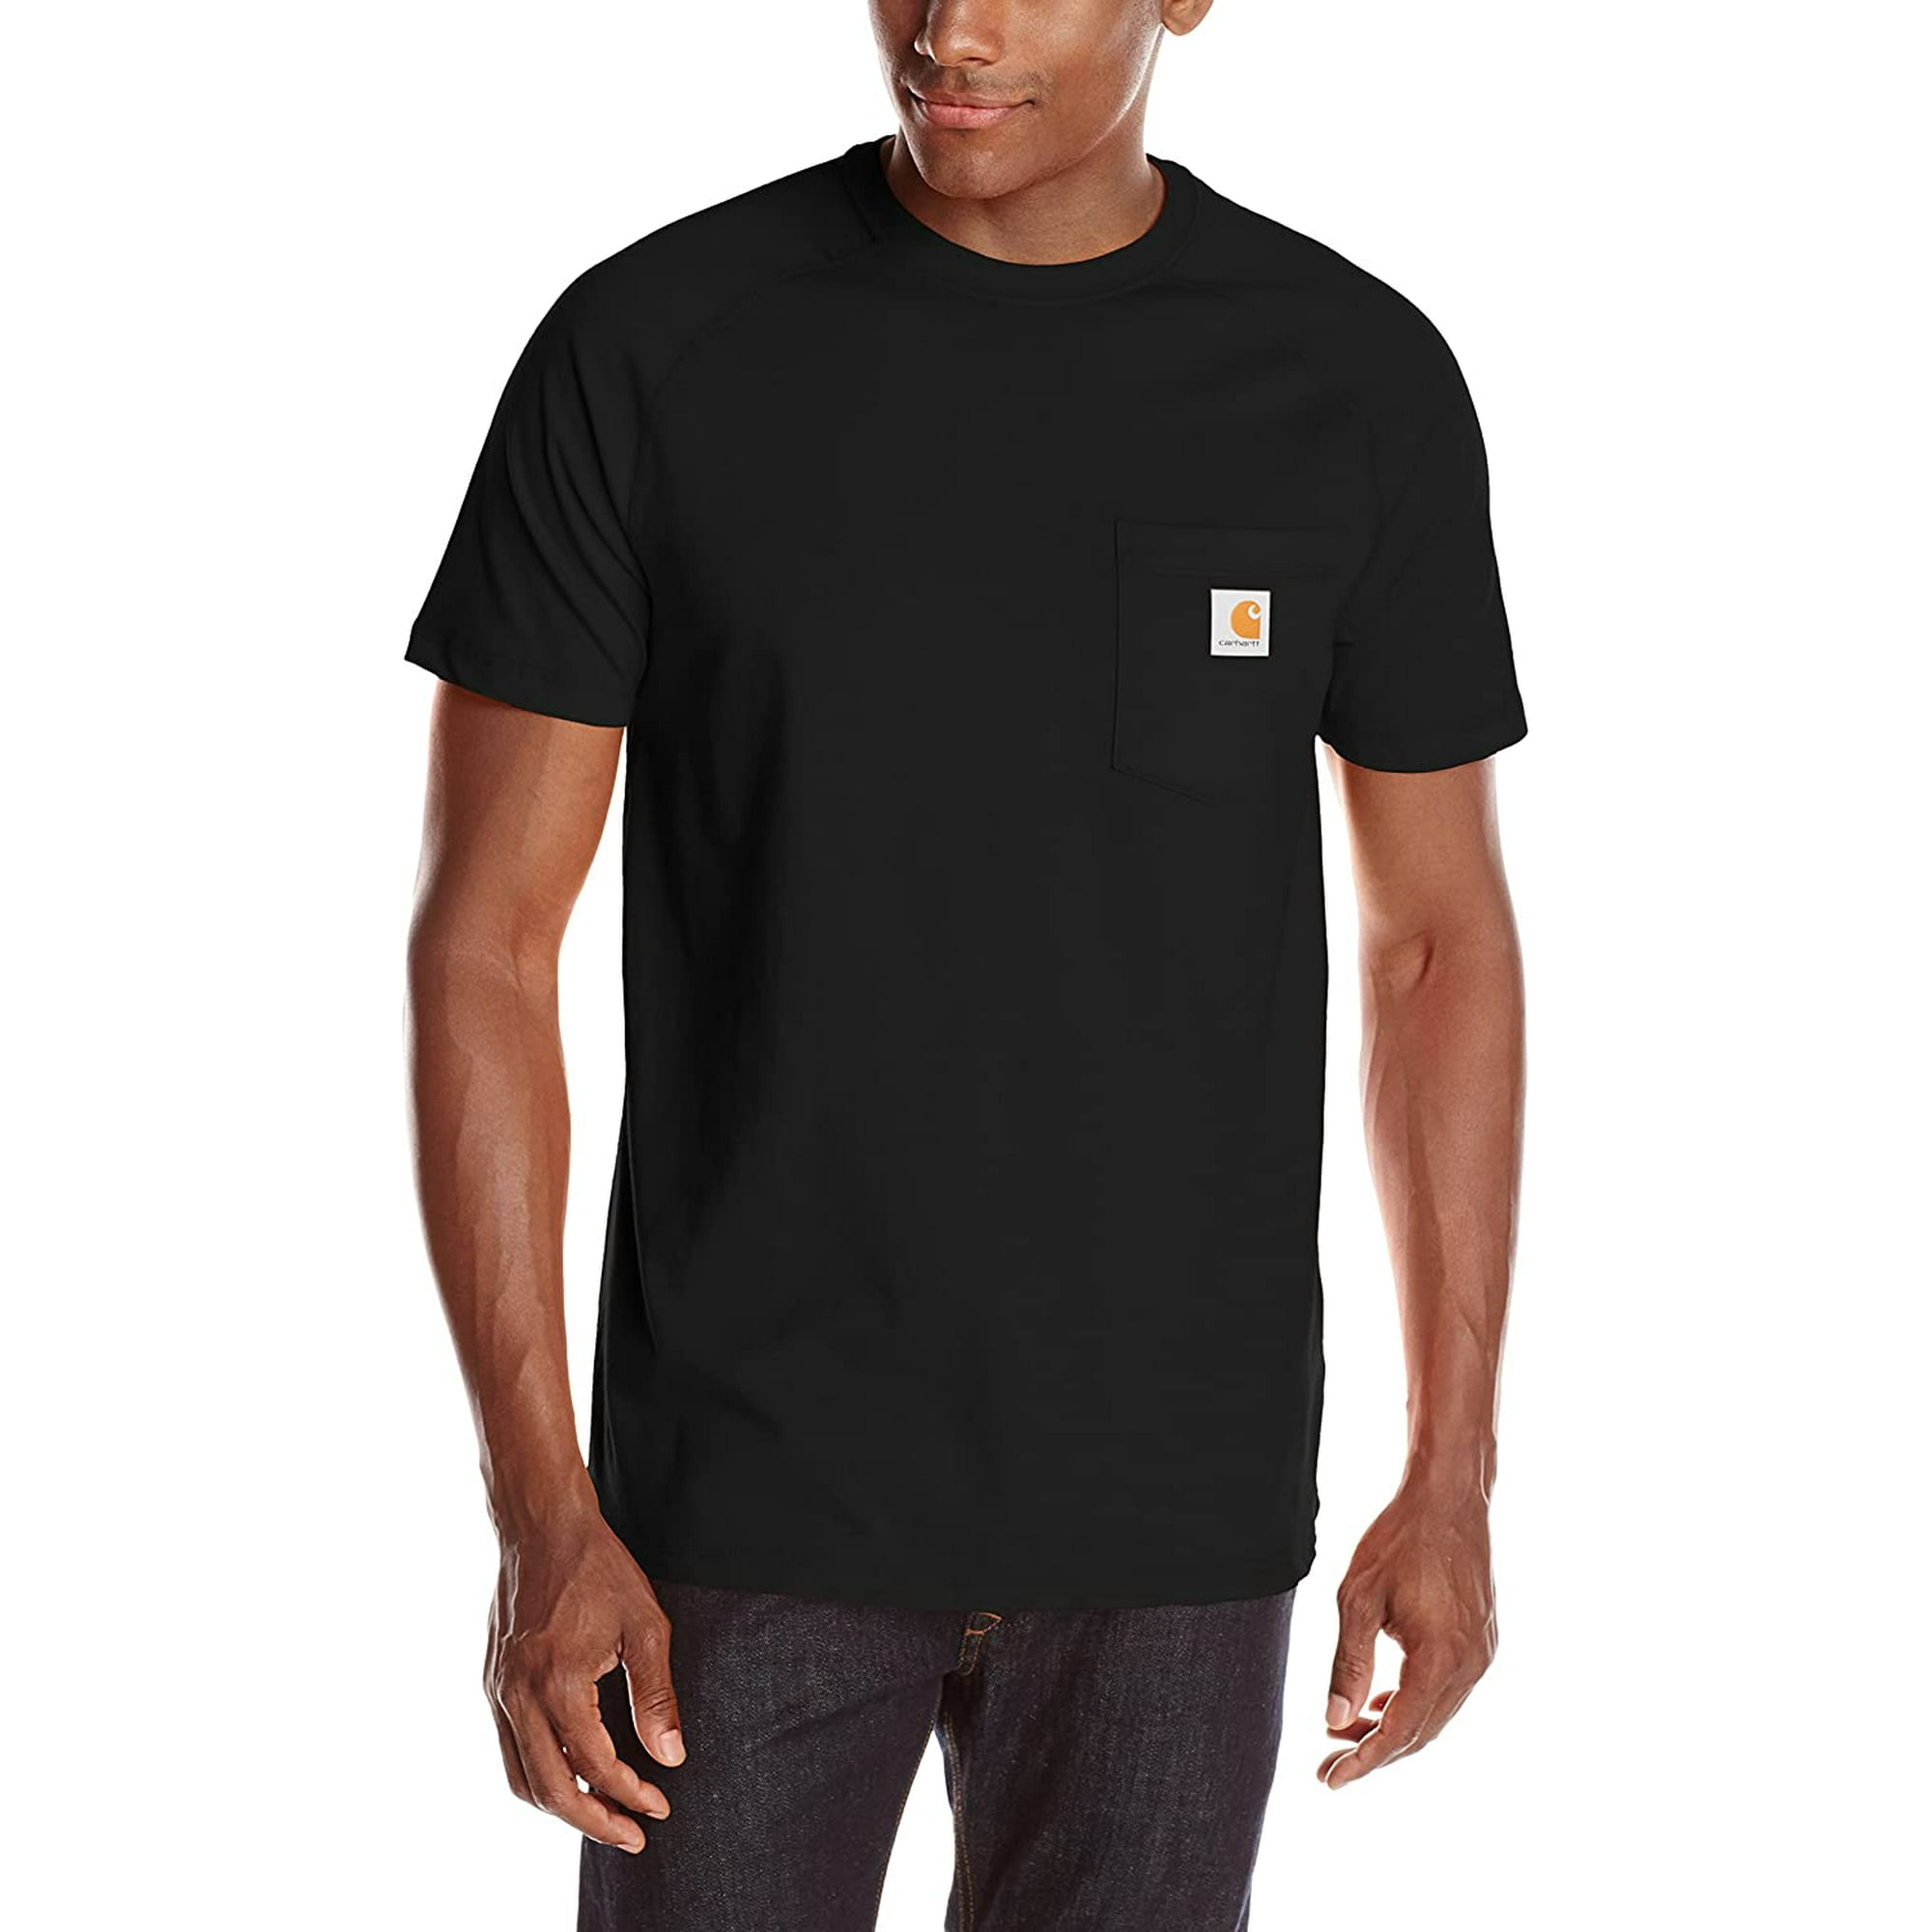 Force Cotton Short Sleeve T-Shirt Relaxed Fit,Black,XX-Large | Walmart Canada